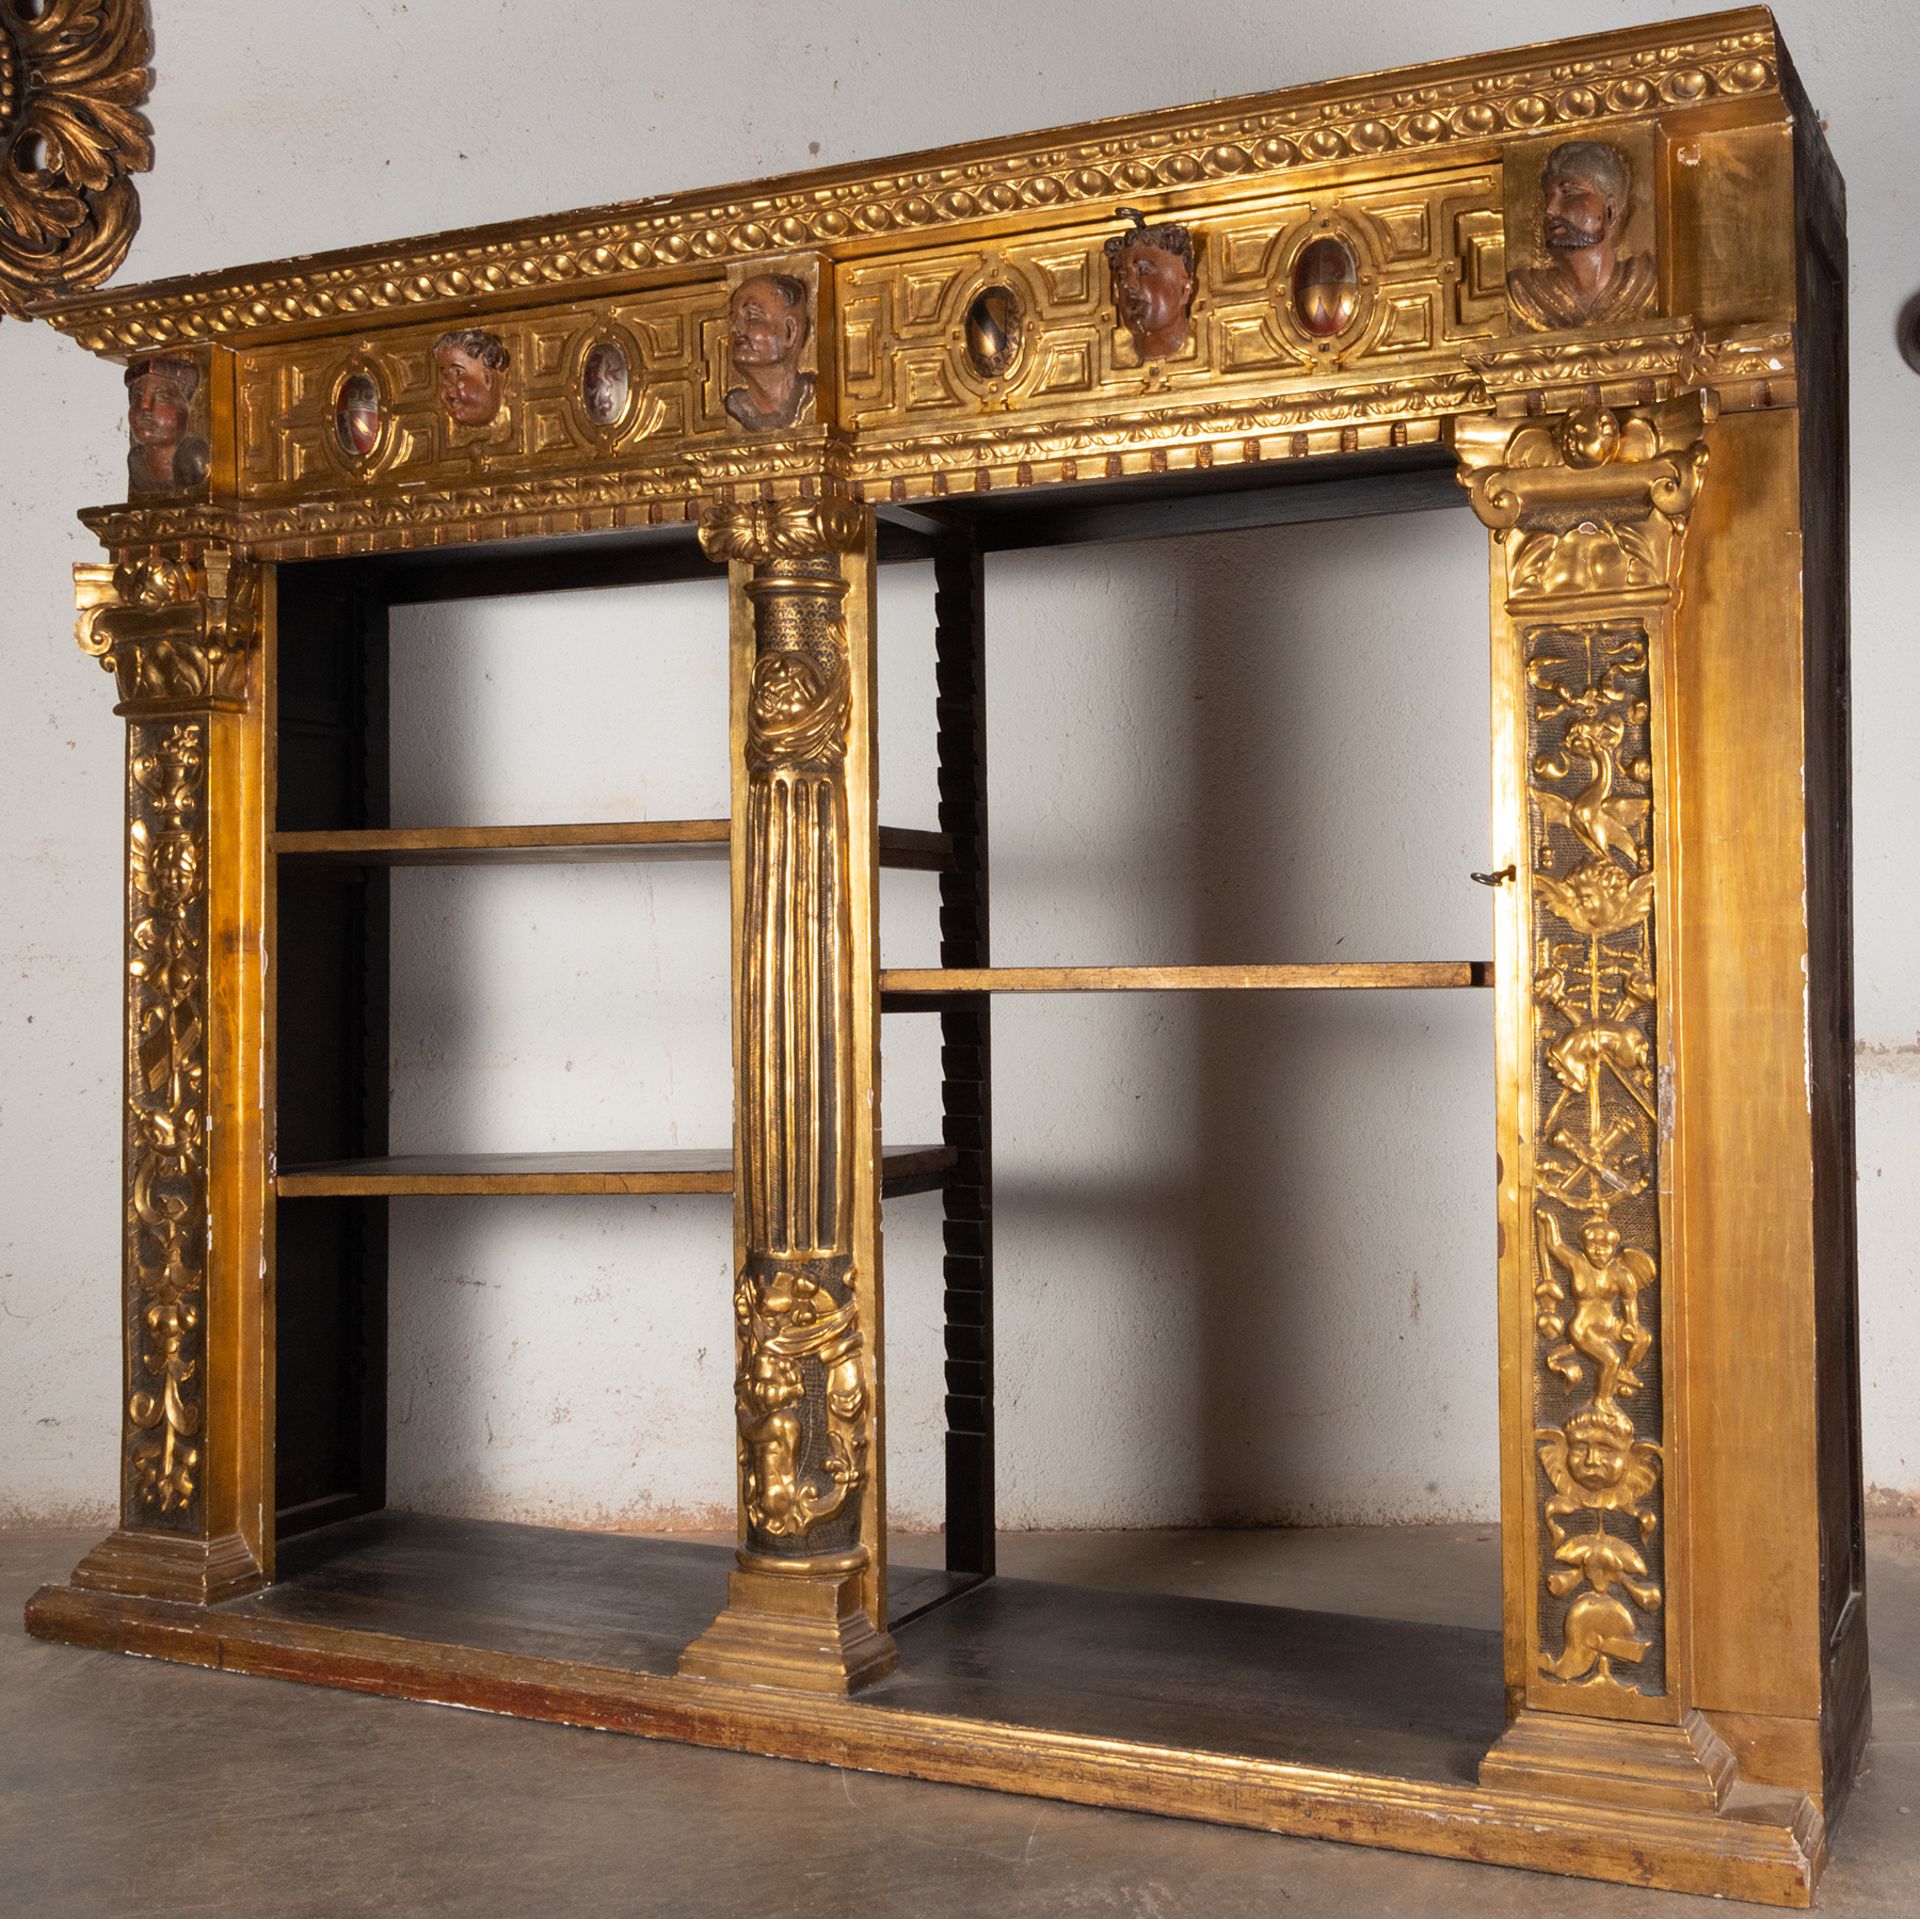 Large Bookcase Furniture (pair of previous batch) made up of a Renaissance Altarpiece with shelves,  - Image 8 of 9